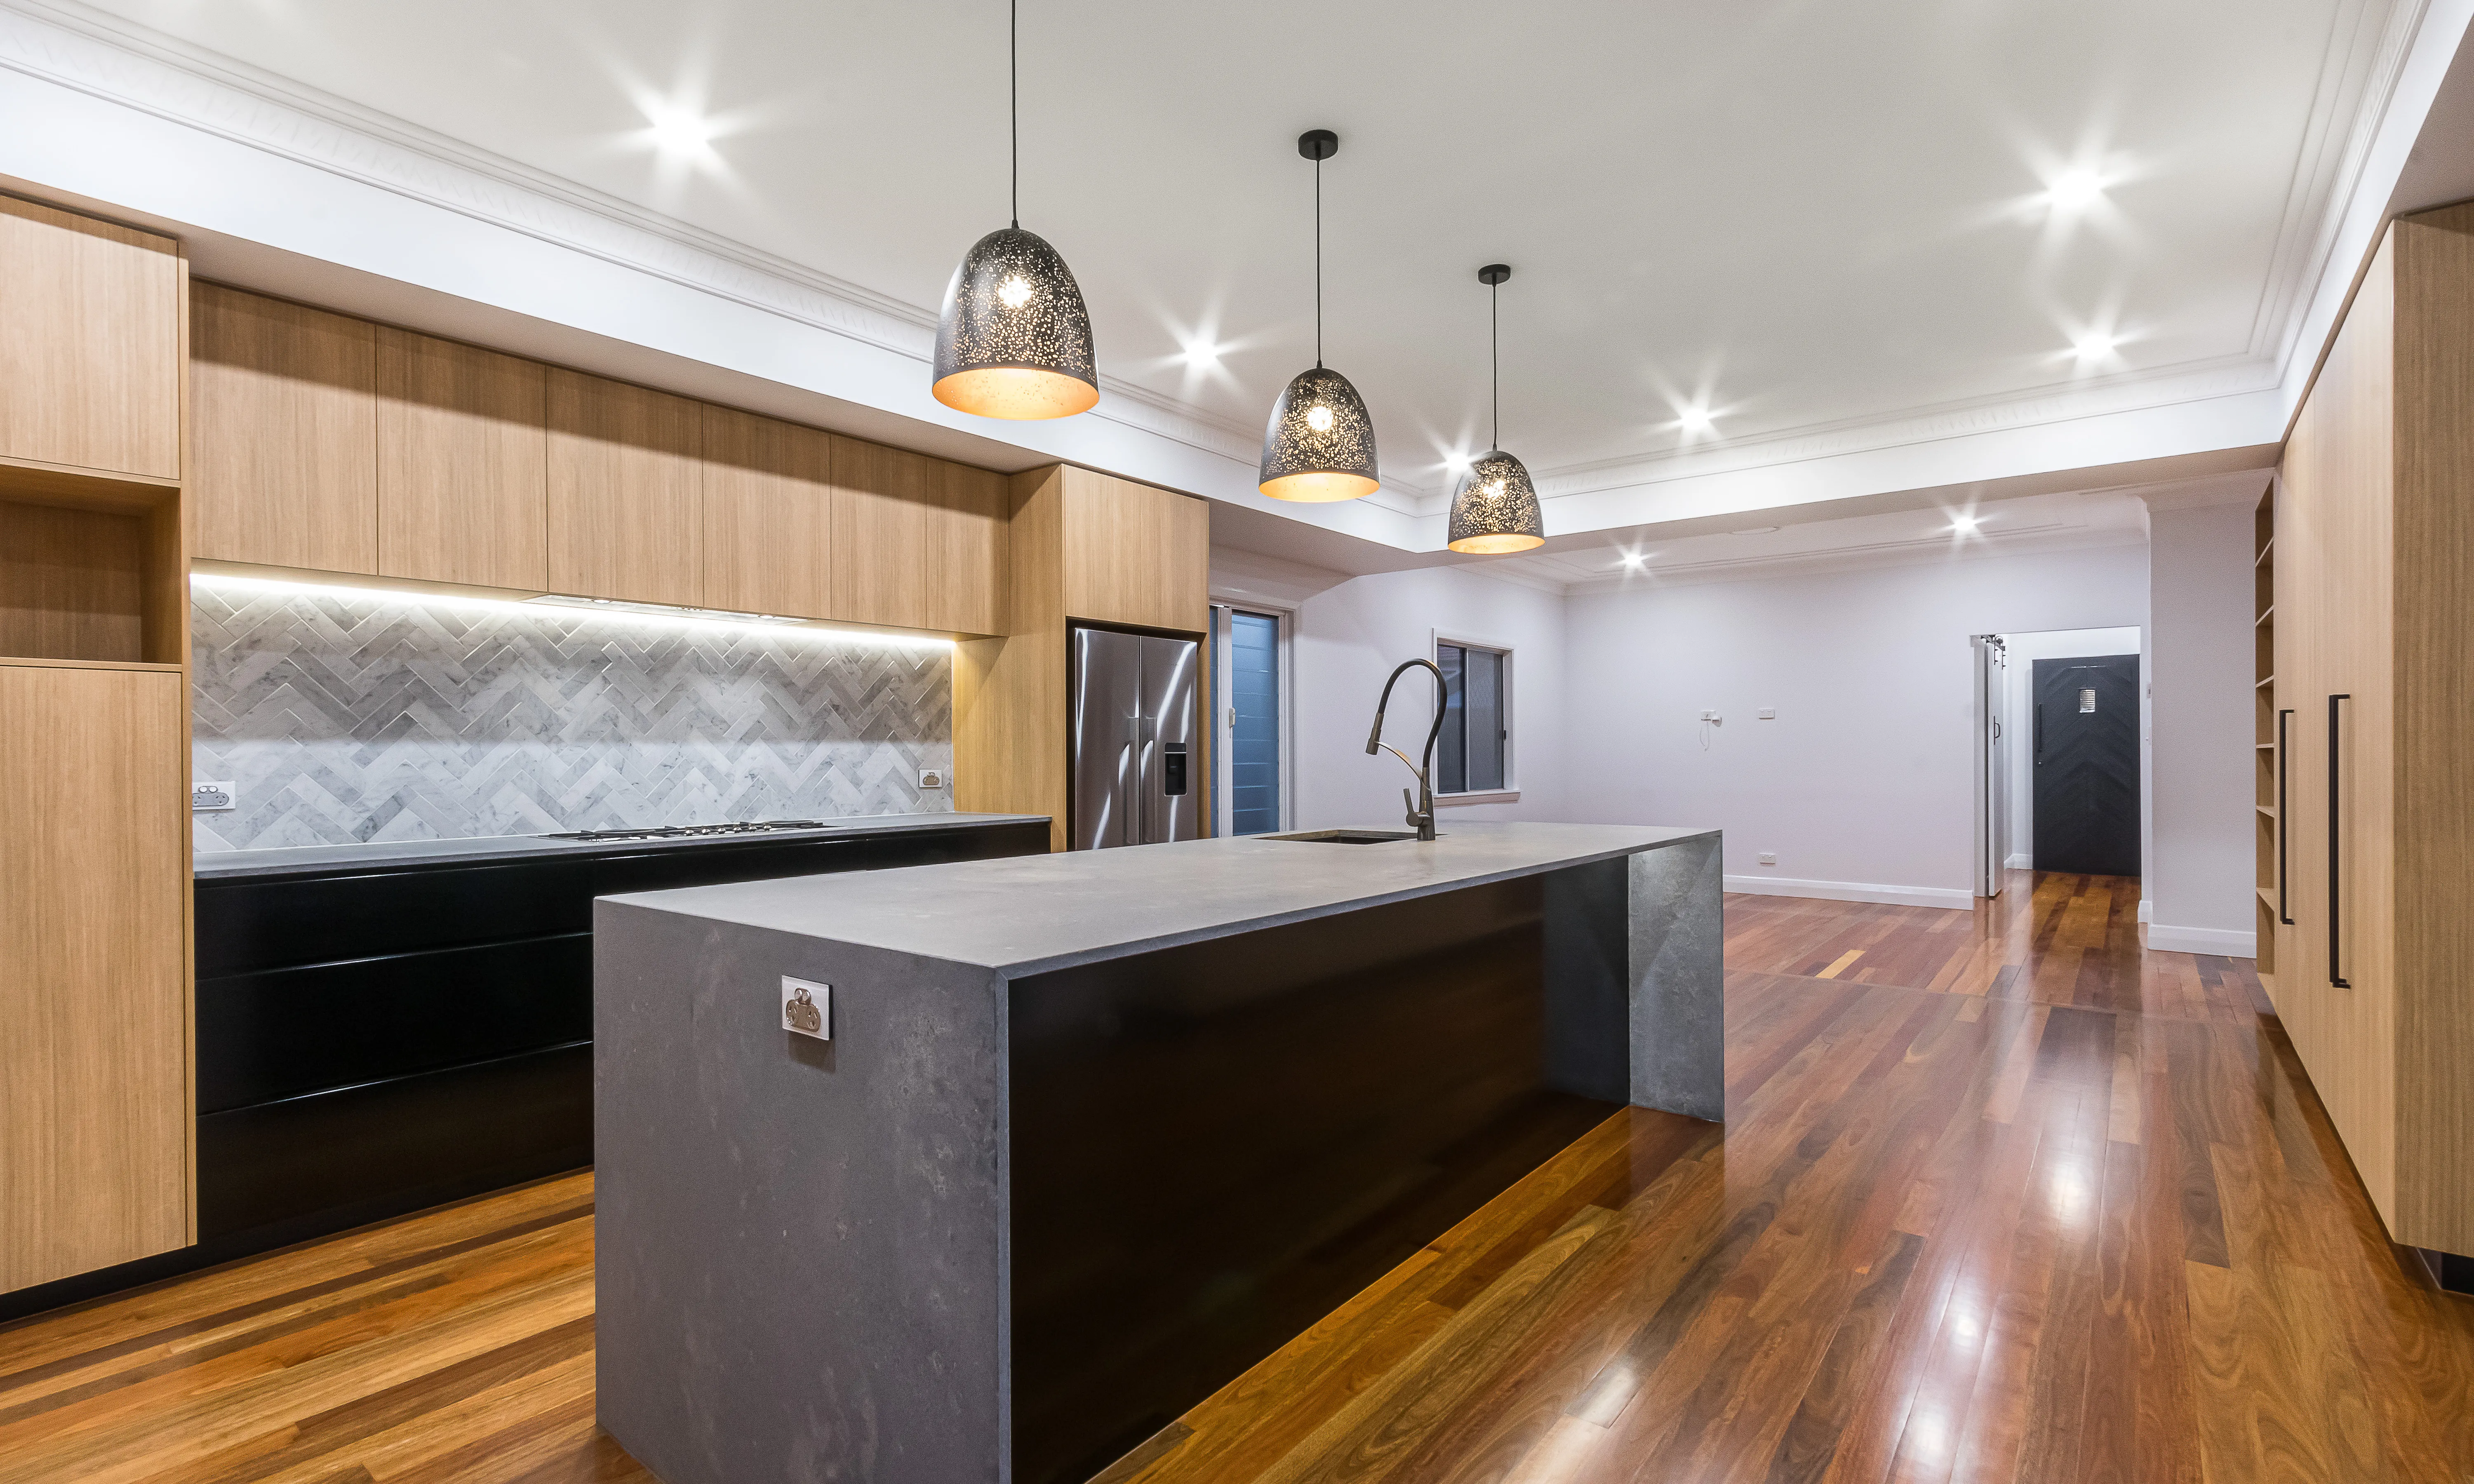 timber kitchen-stone benchtop- timber flooring- black handles- black cabinets-marble tiles